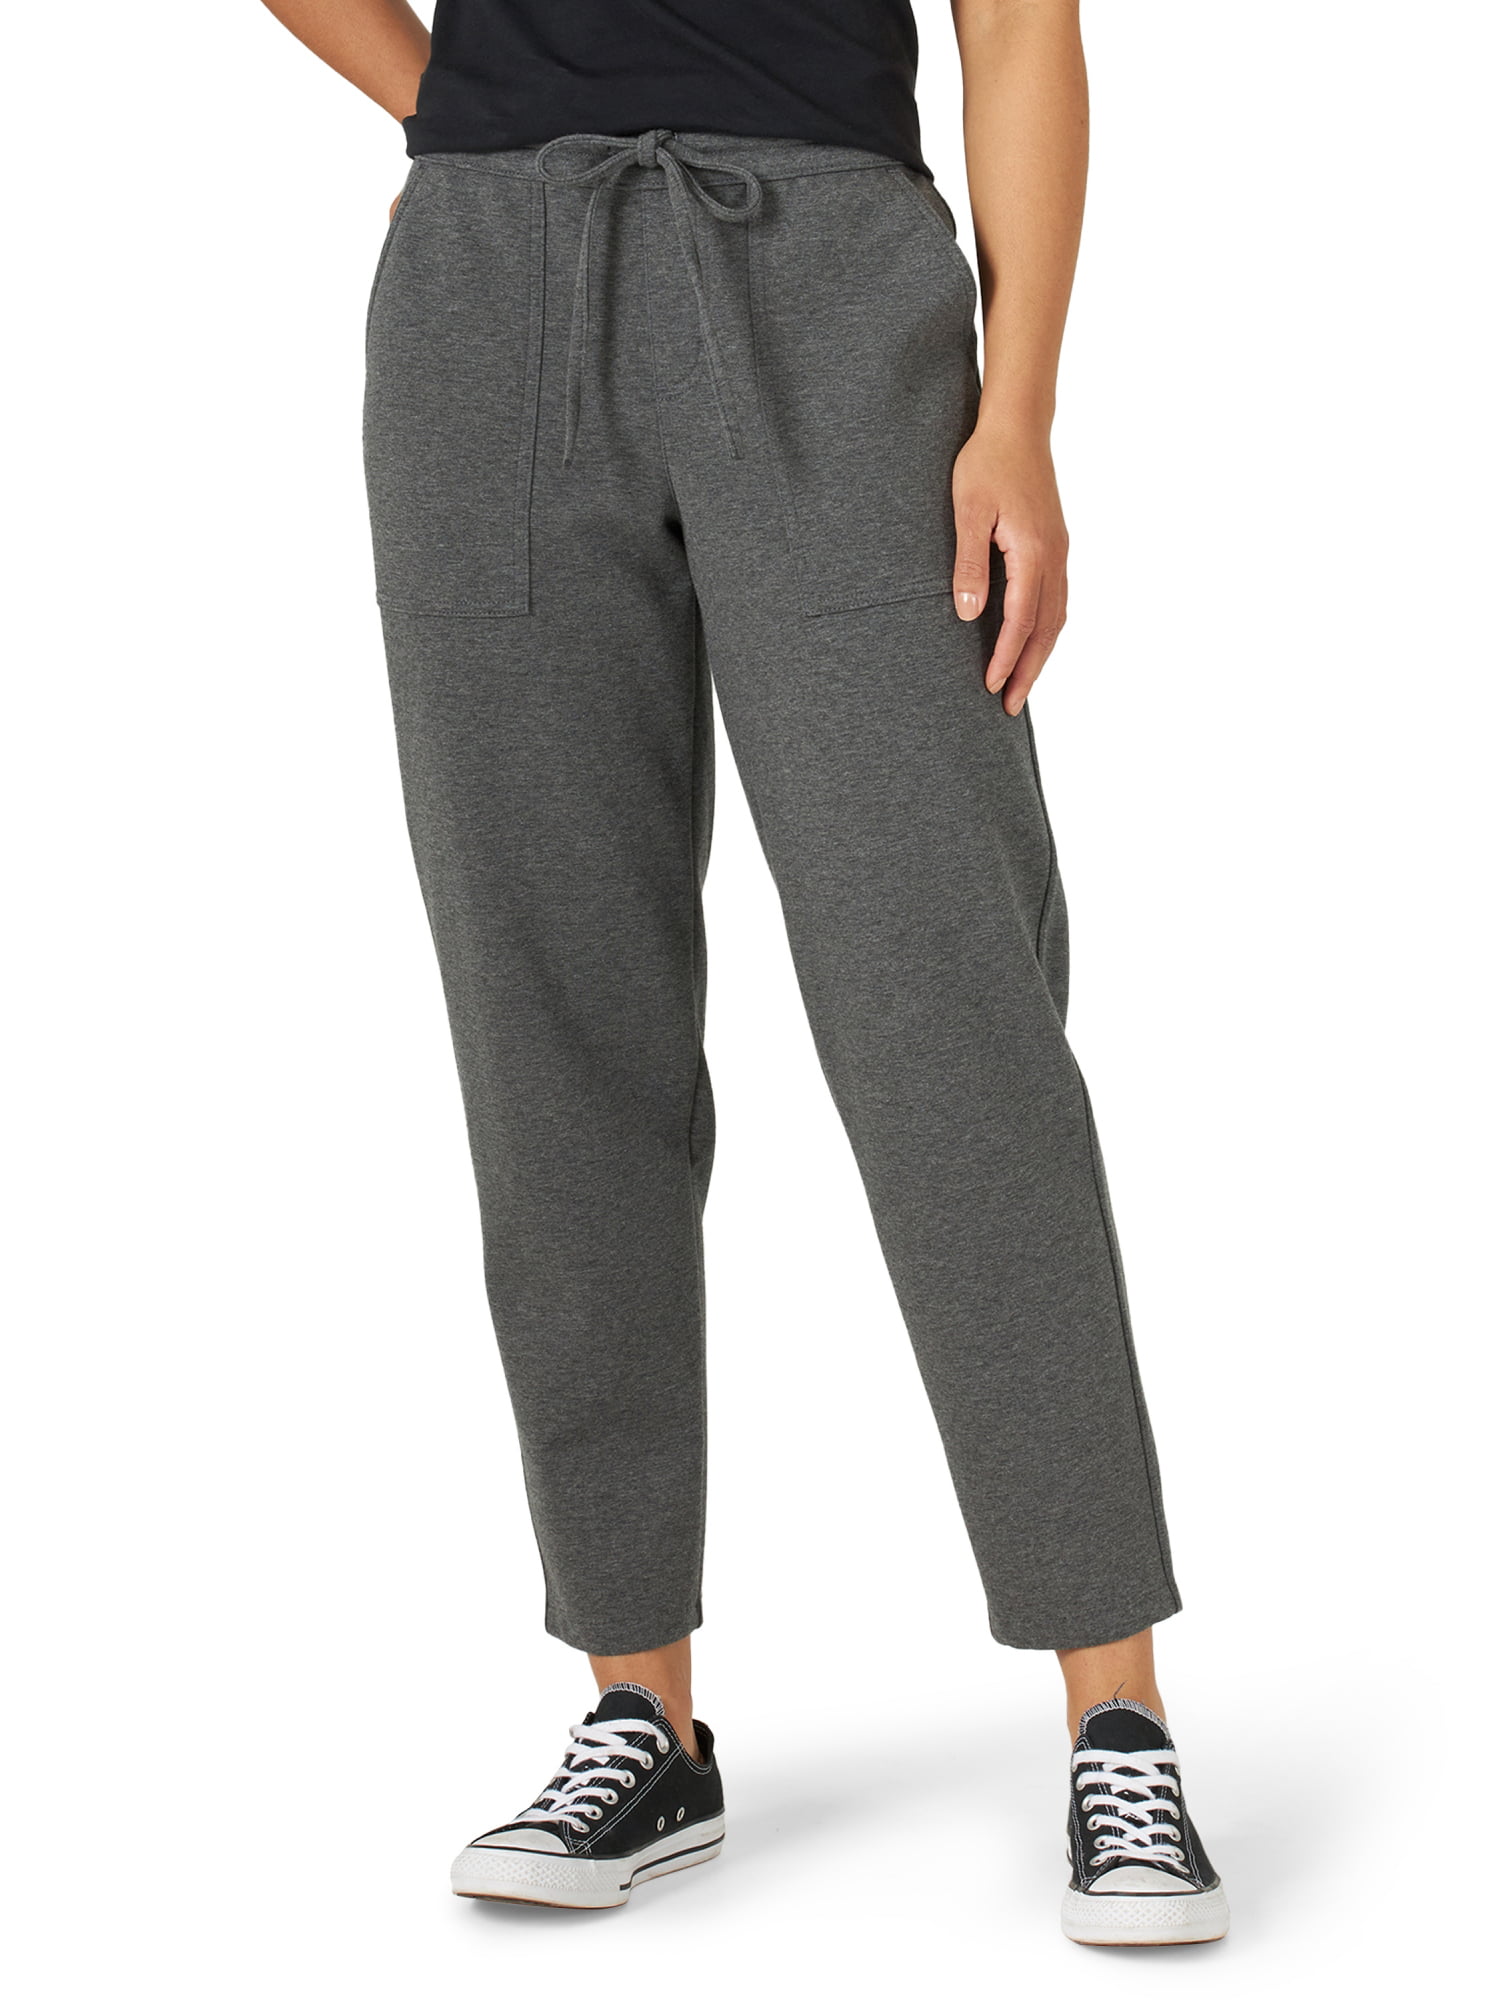 Lee Women's Relaxed Fit Tapered Ankle Crop Sweatpants - Walmart.com